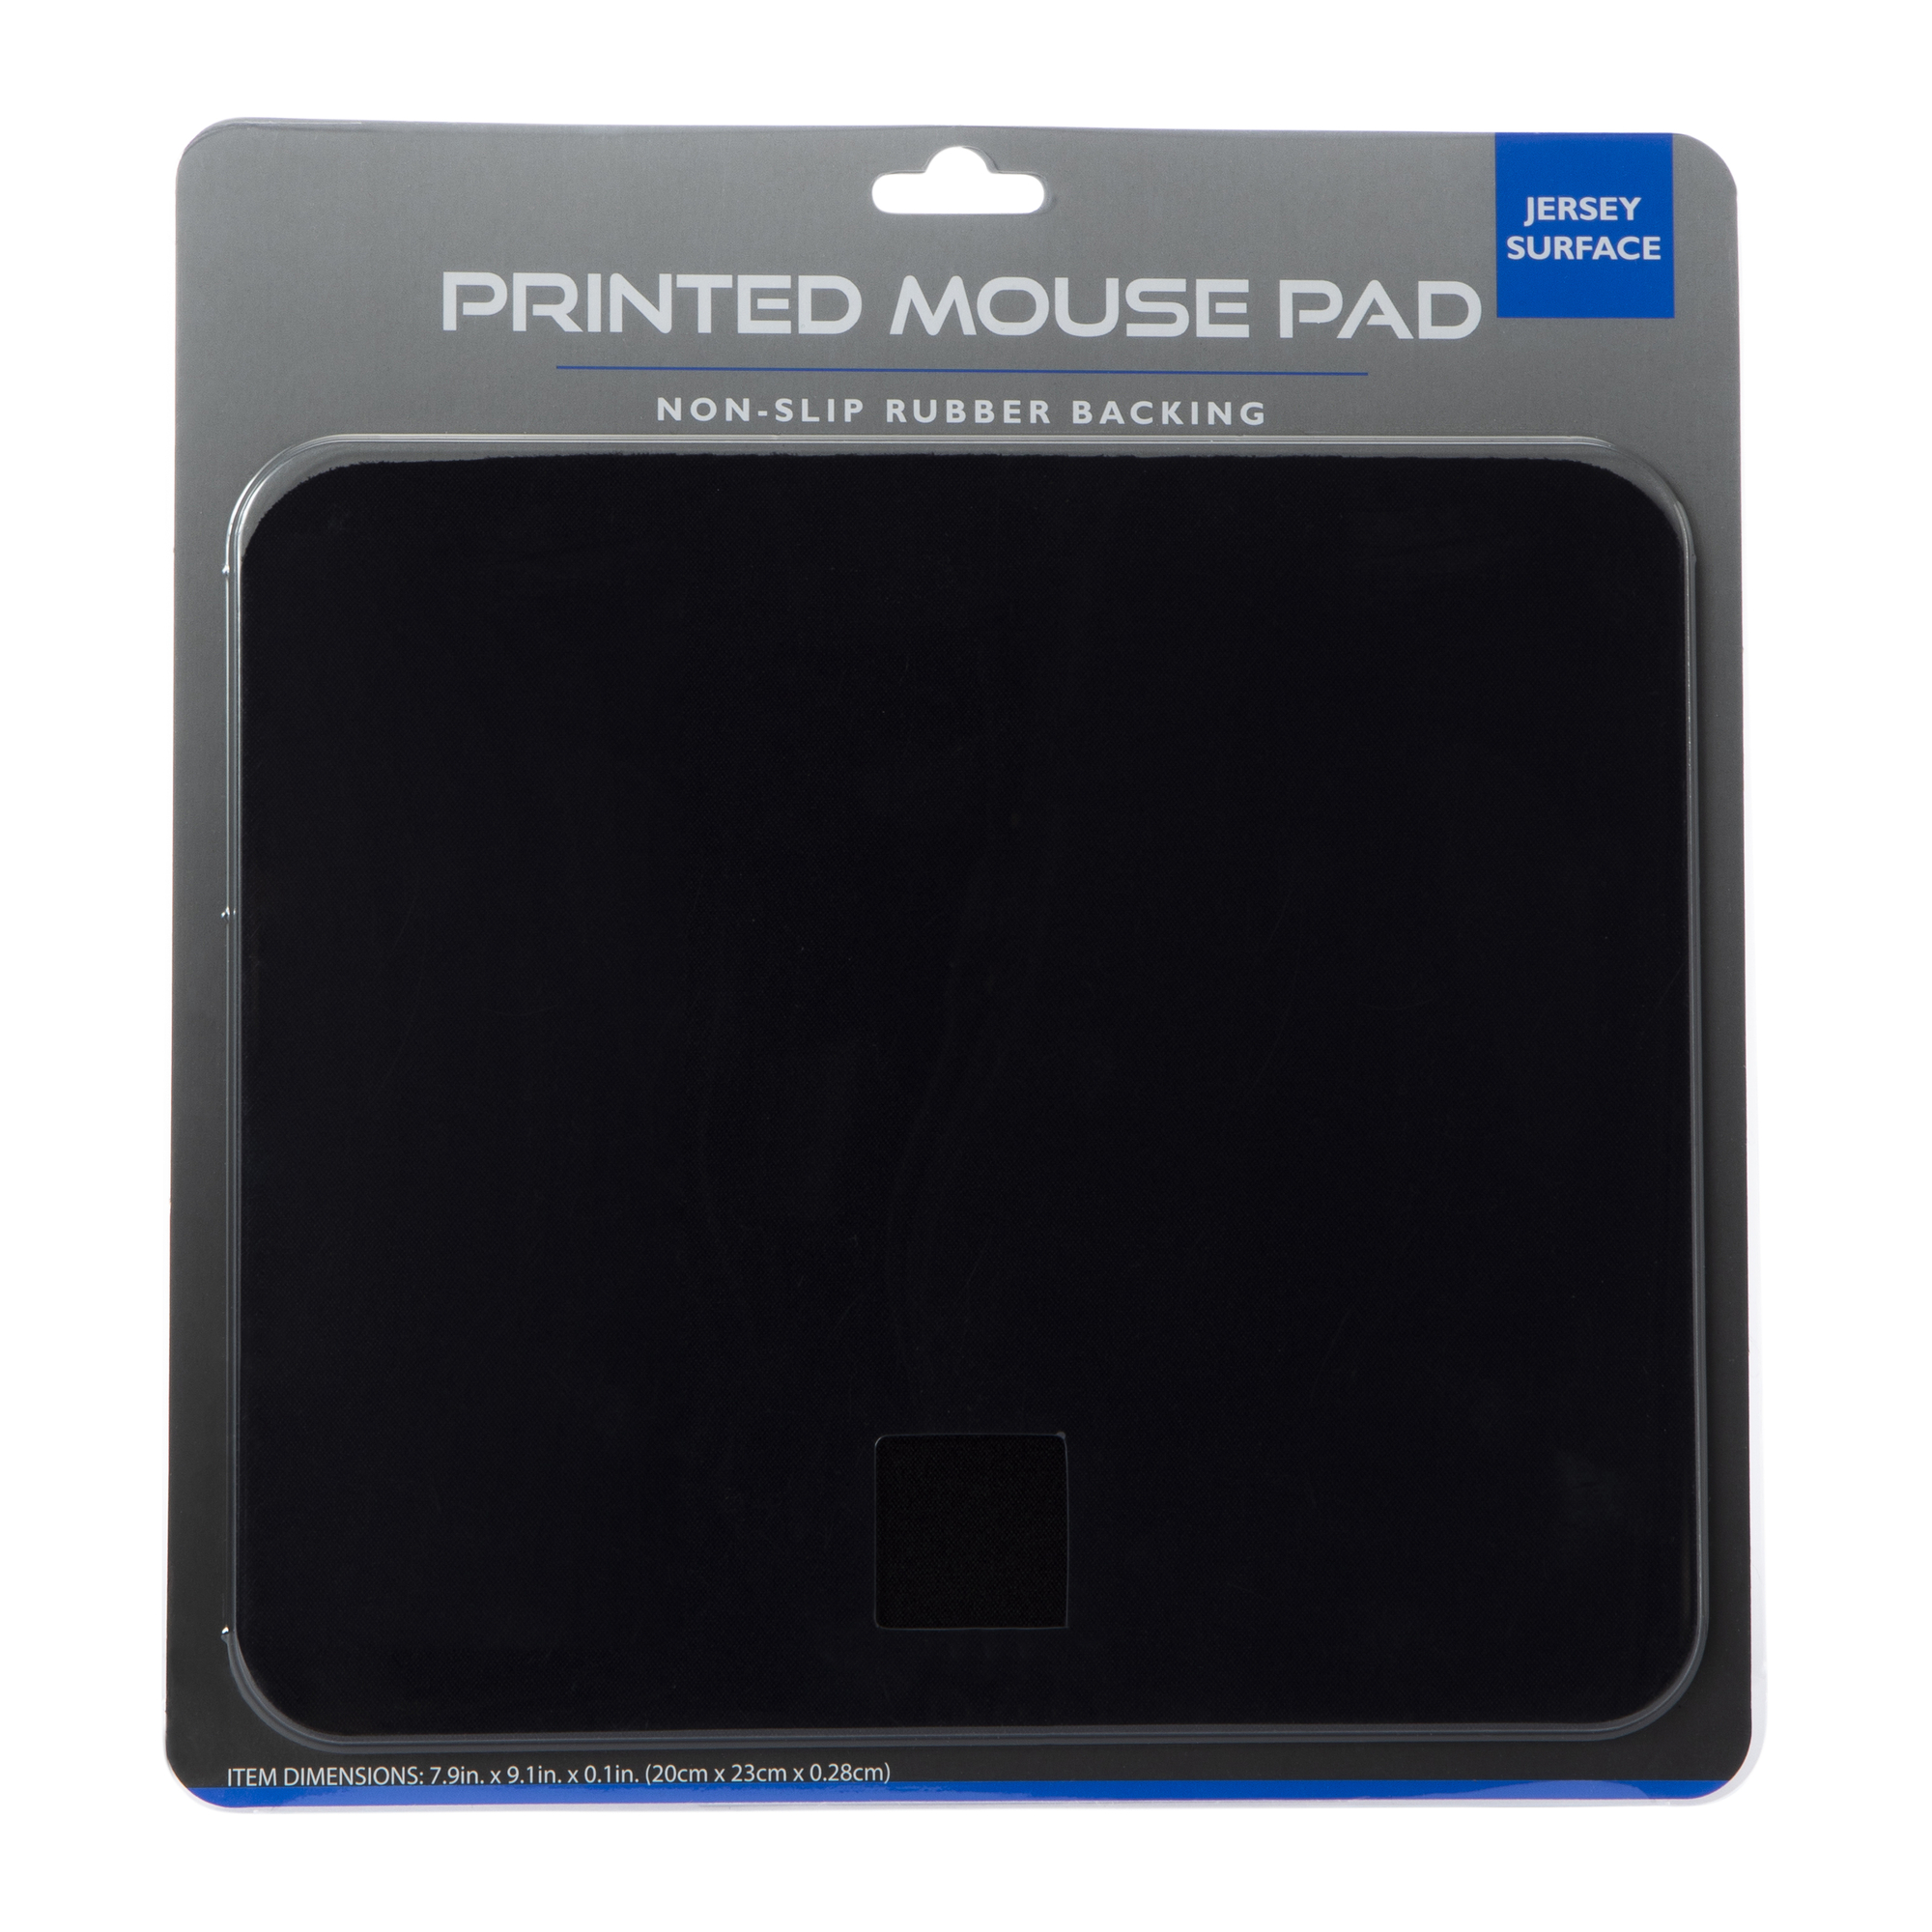 printed mouse pad 7.9in x 9.1in